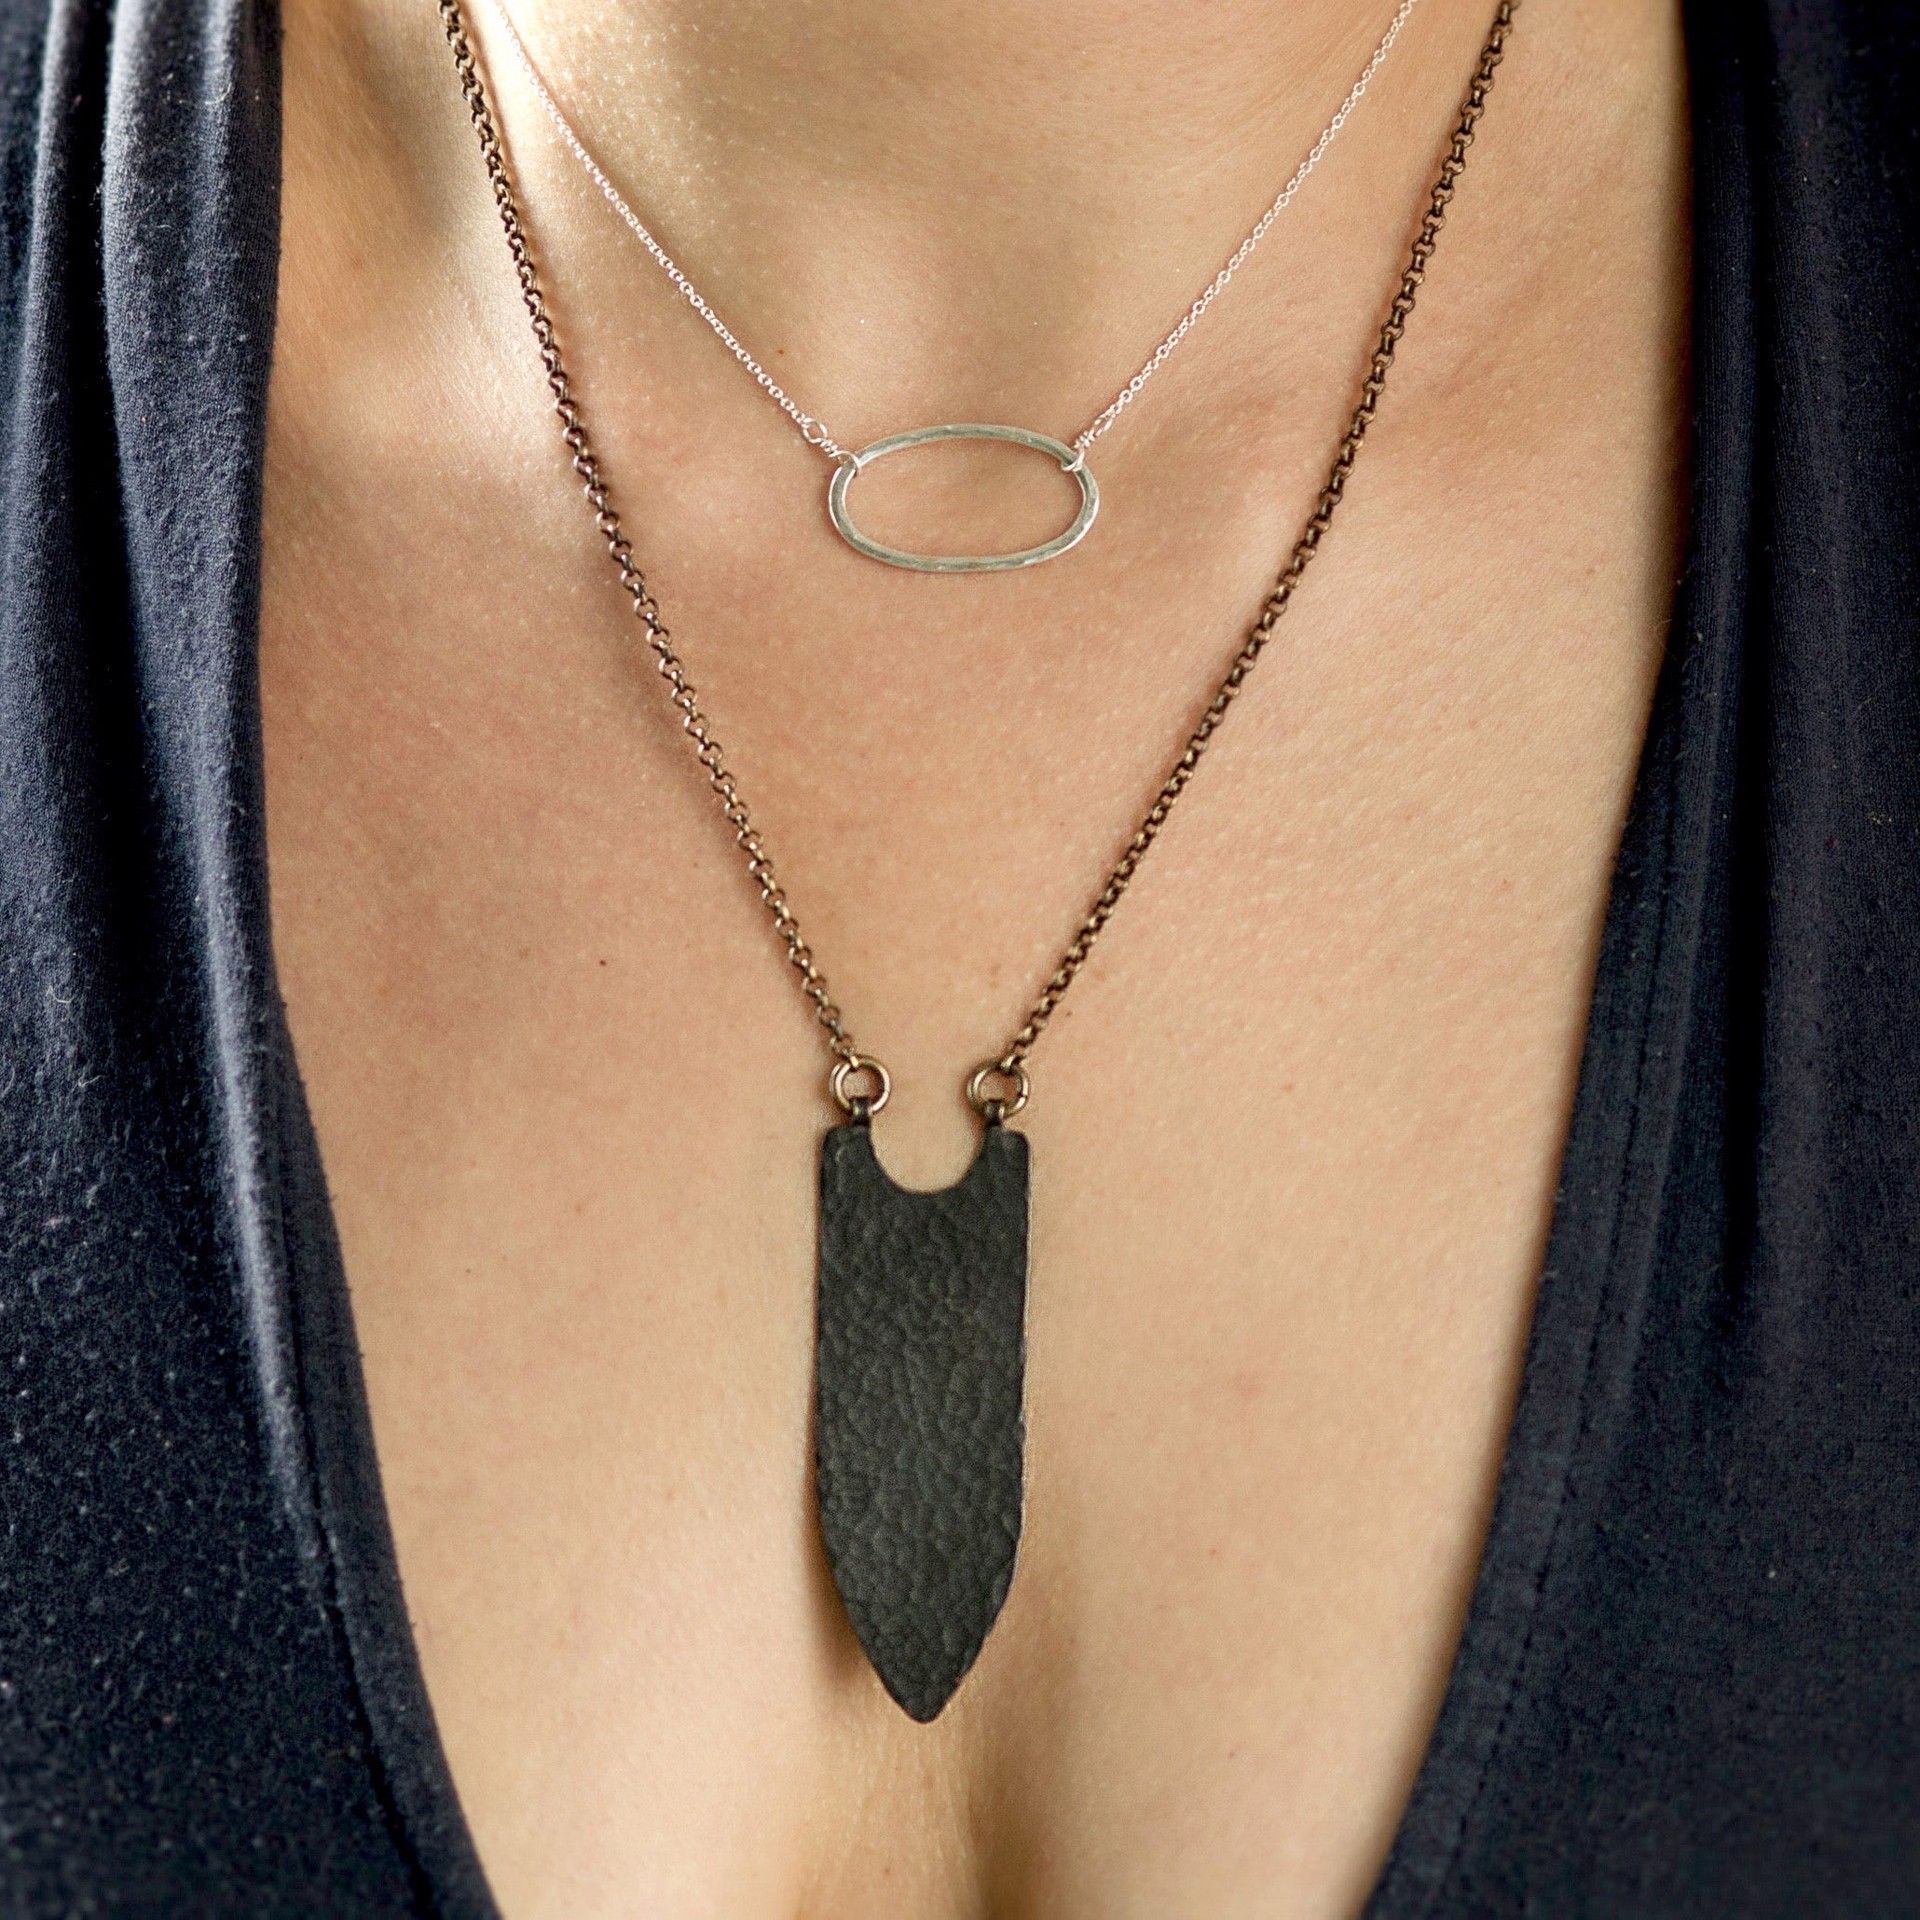 Banner Necklace in Blackened Copper by Clementine & Co. Jewelry